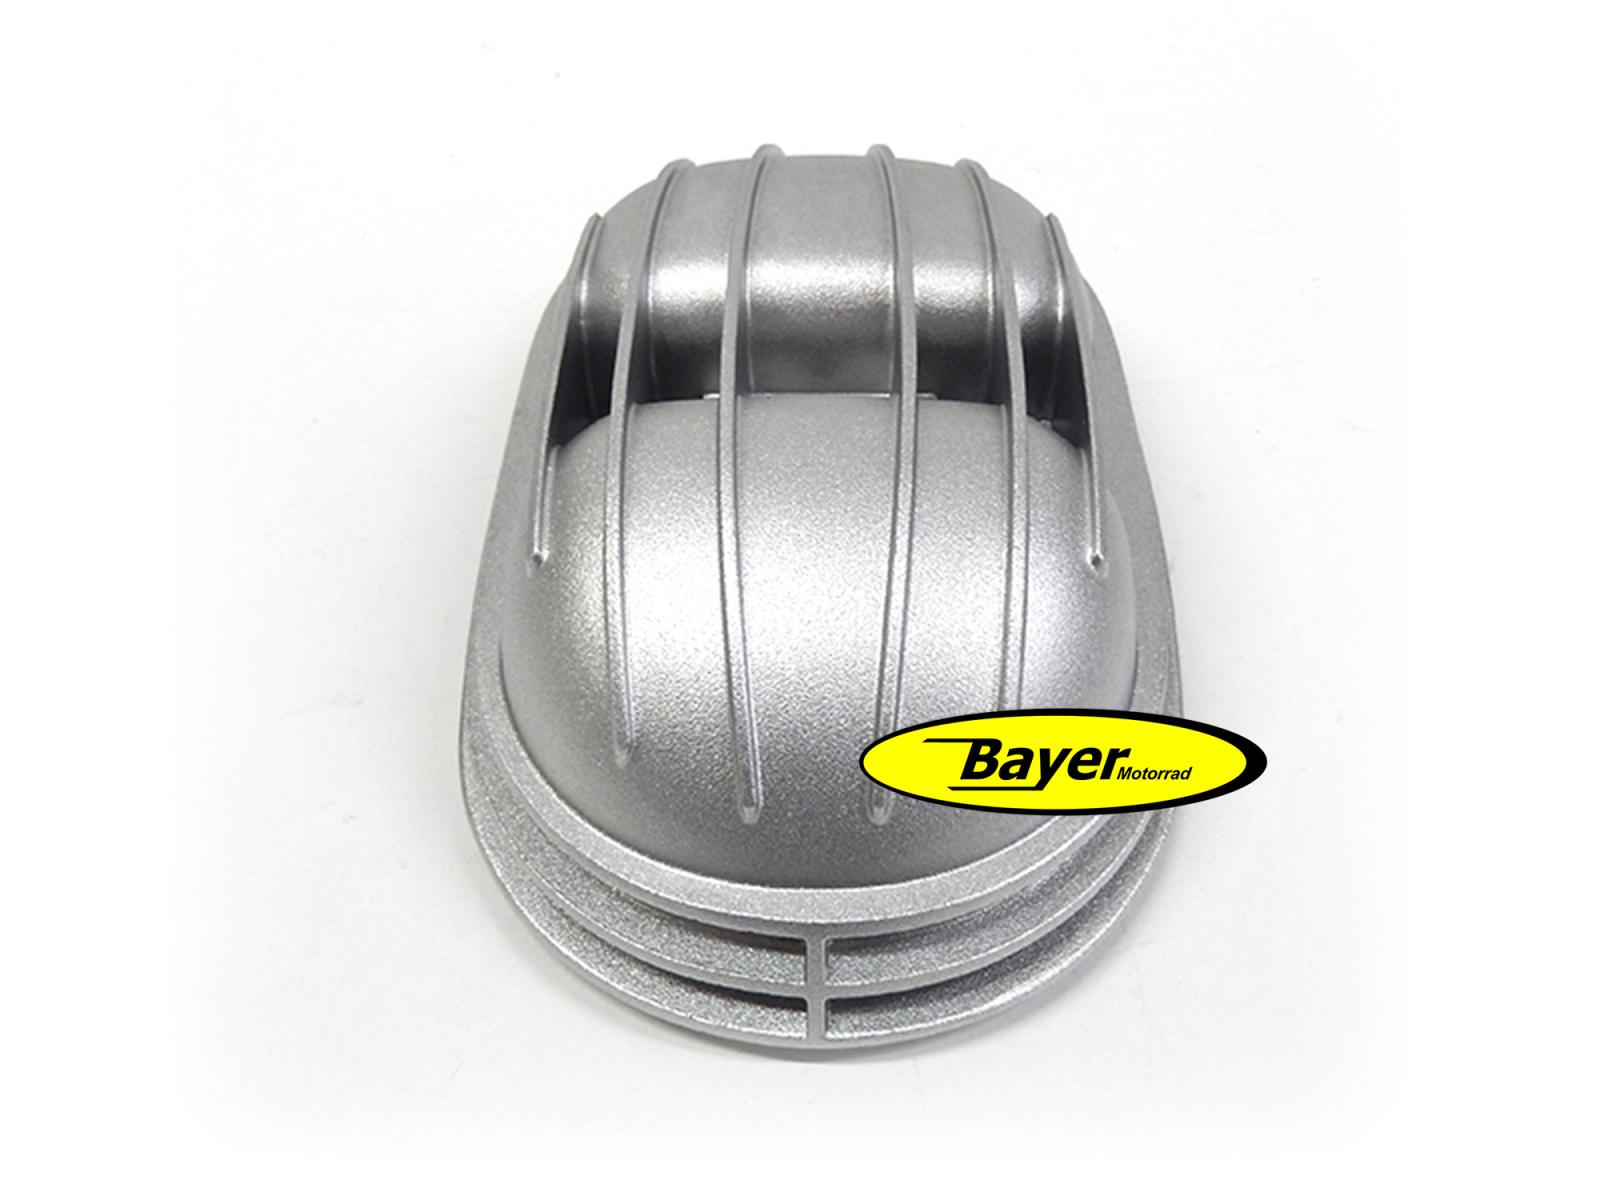 Cylinder head cover Edition 51 for all BMW R2V Boxer models